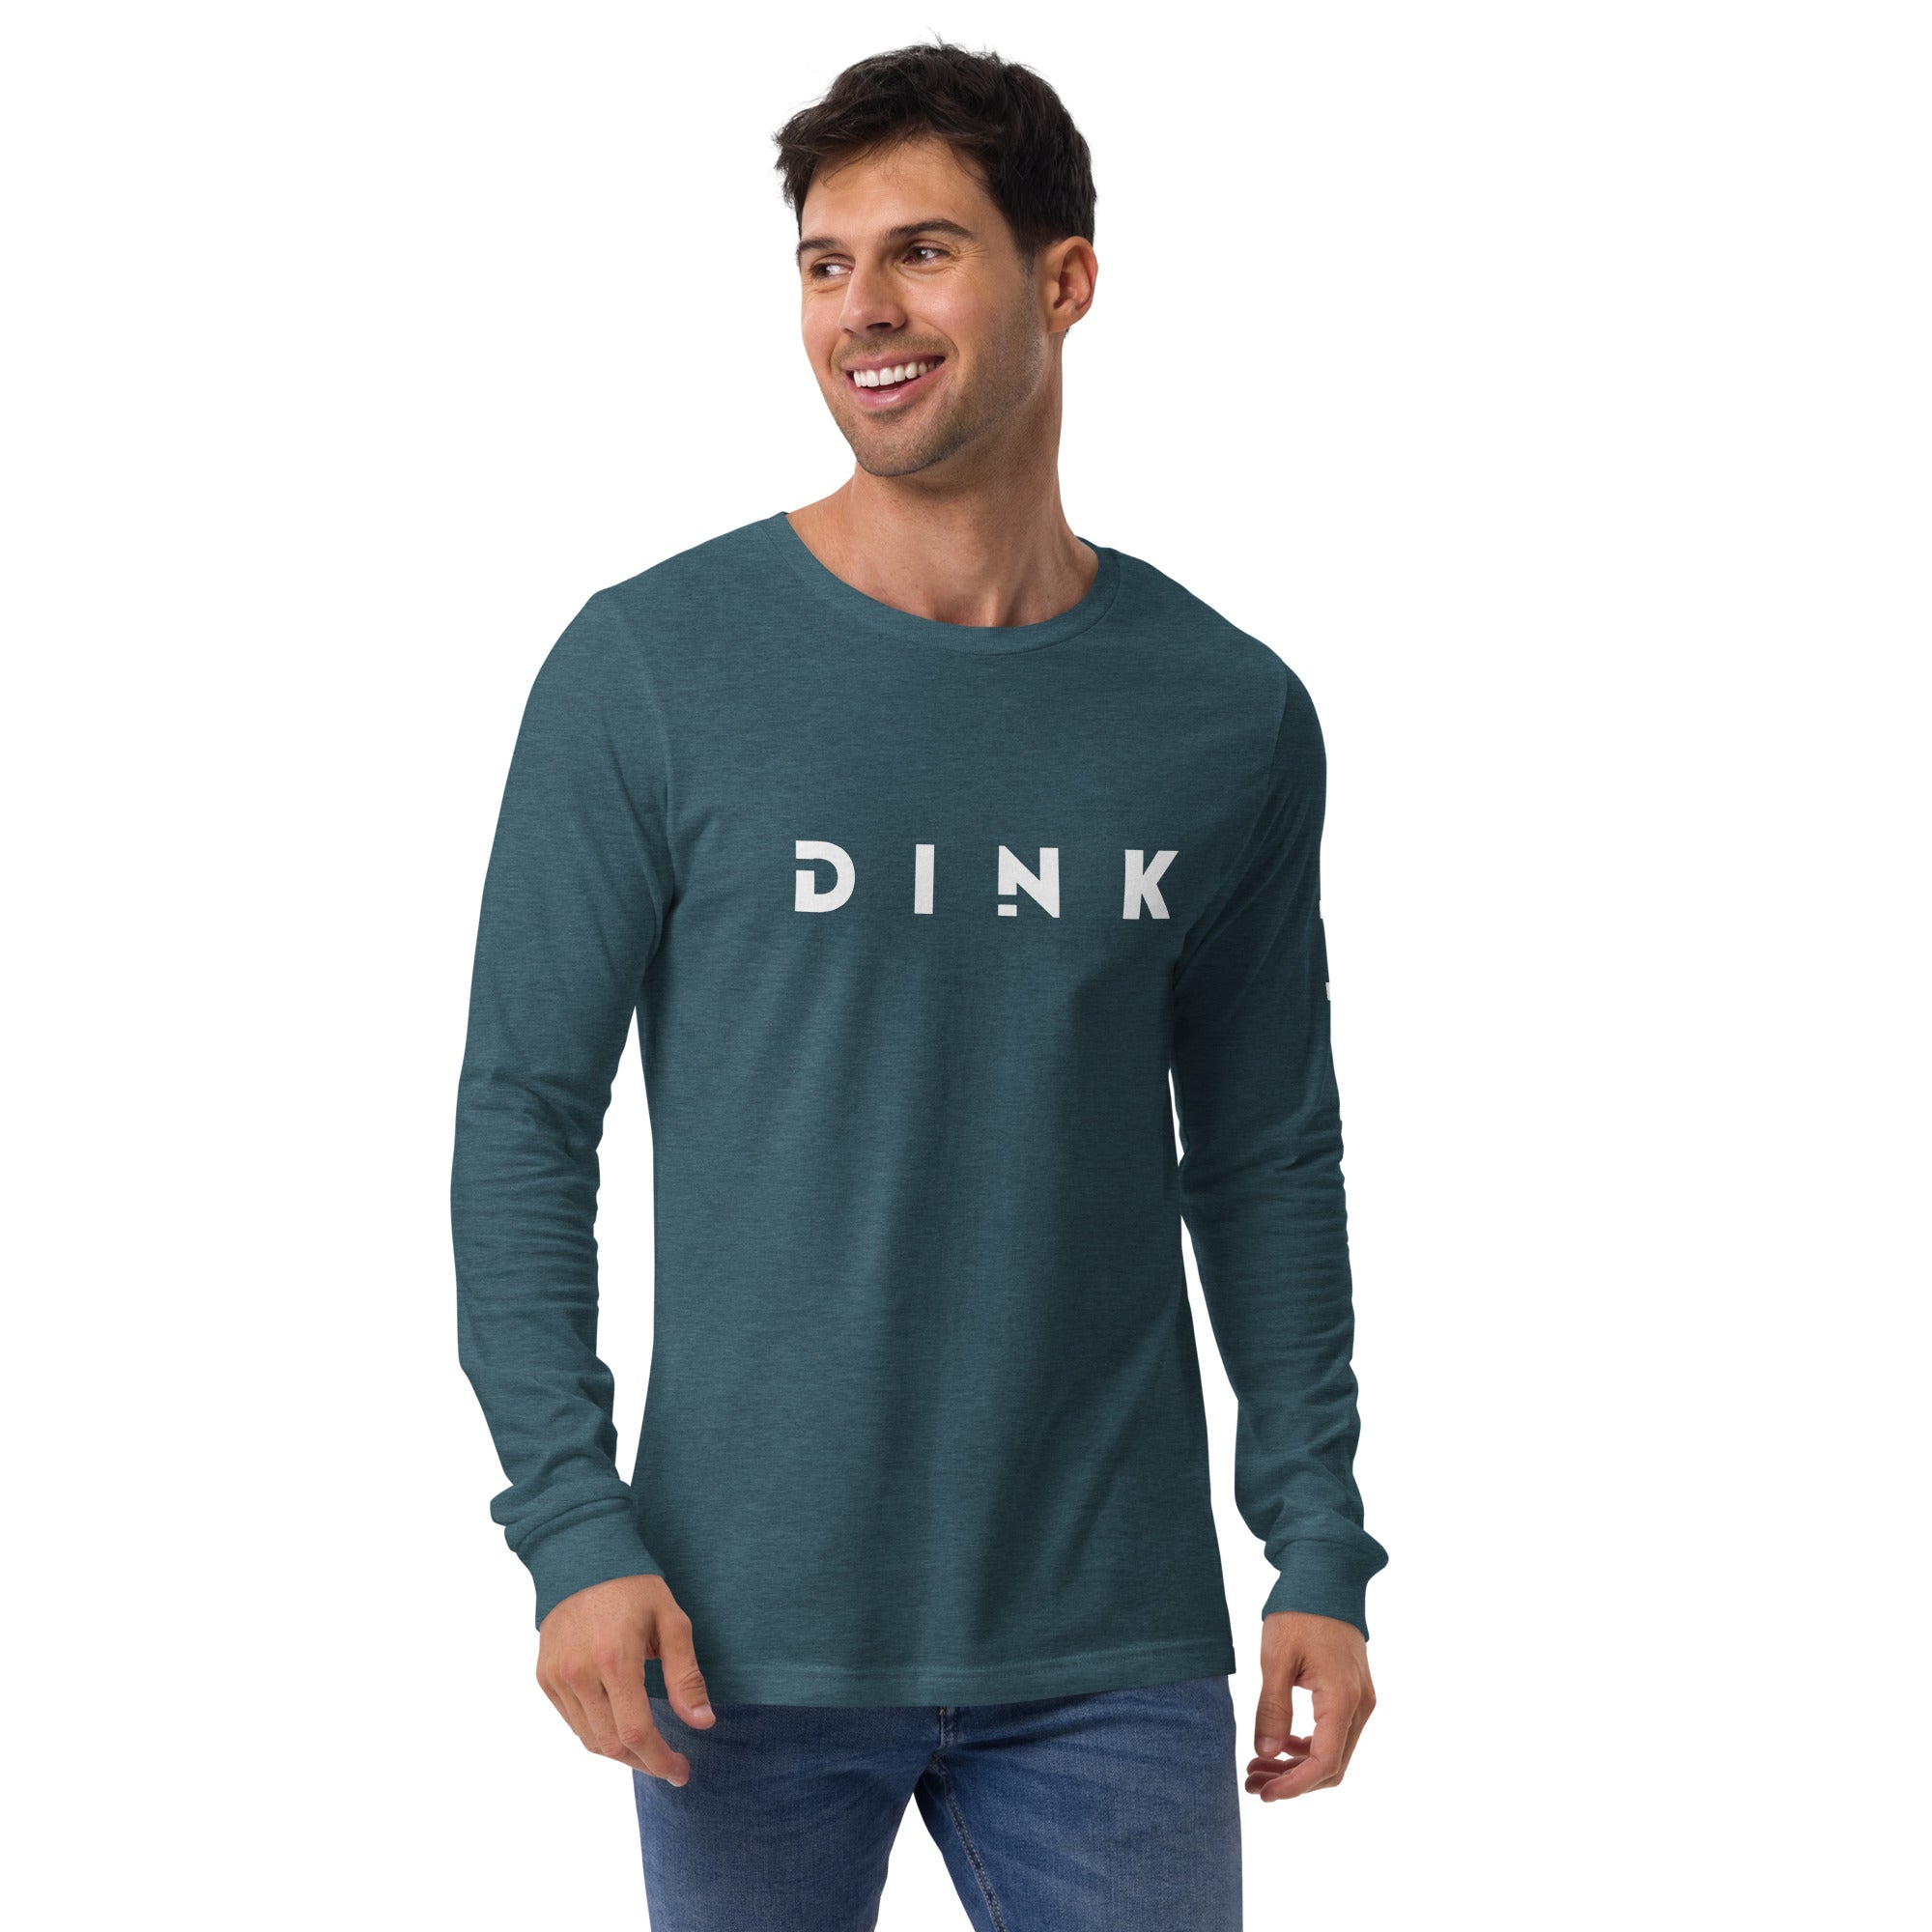 gifteabox - Long-sleeved T-shirt with long-sleeved dia pin-tuck